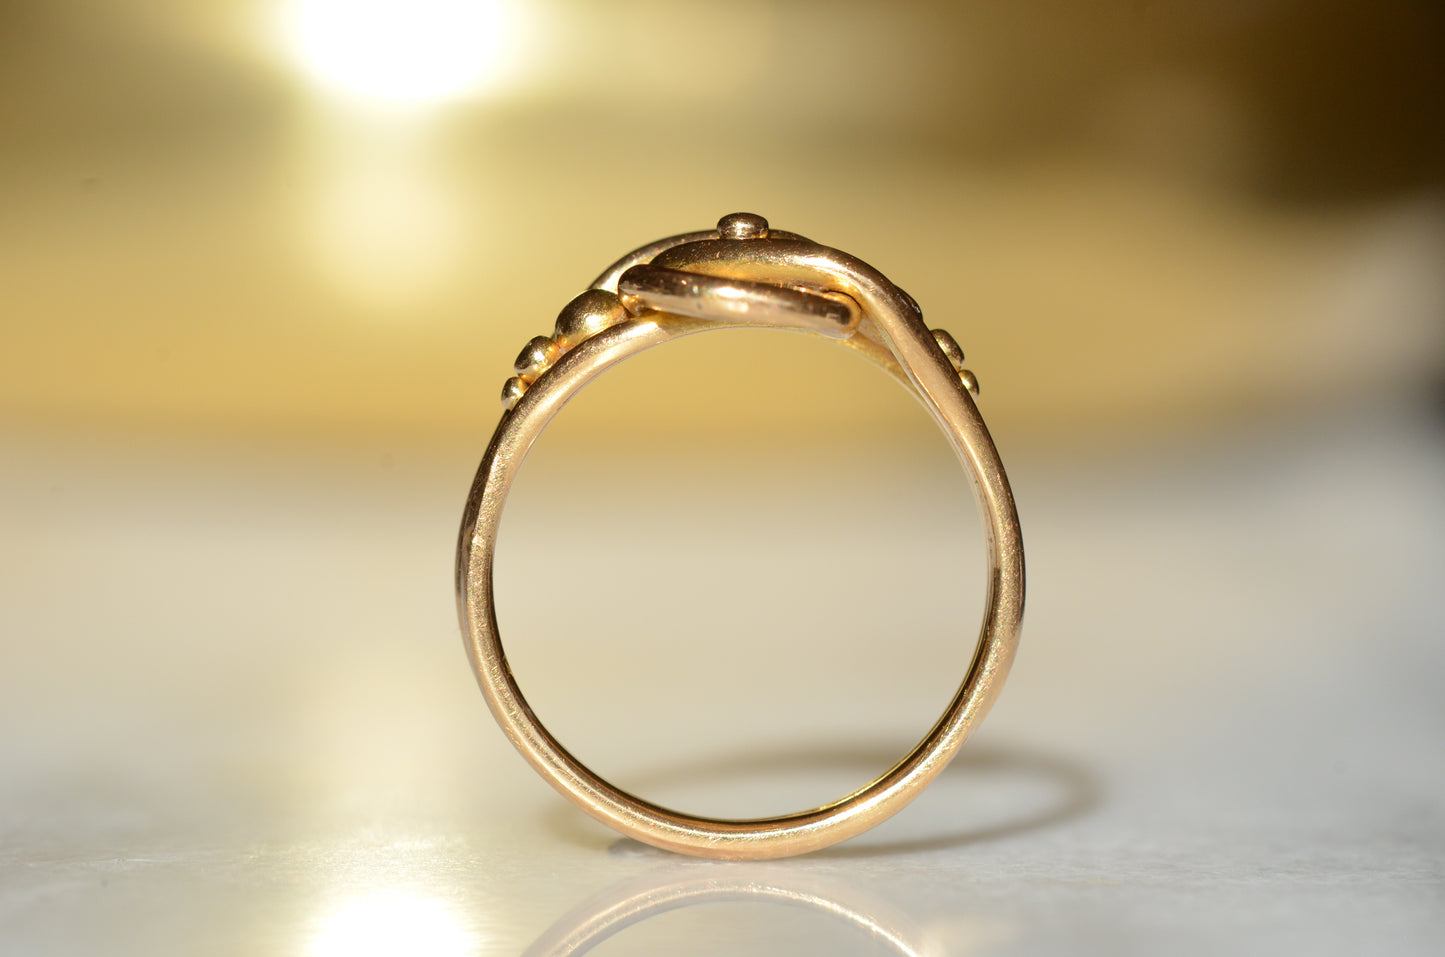 Lush Antique Lover's Knot Ring